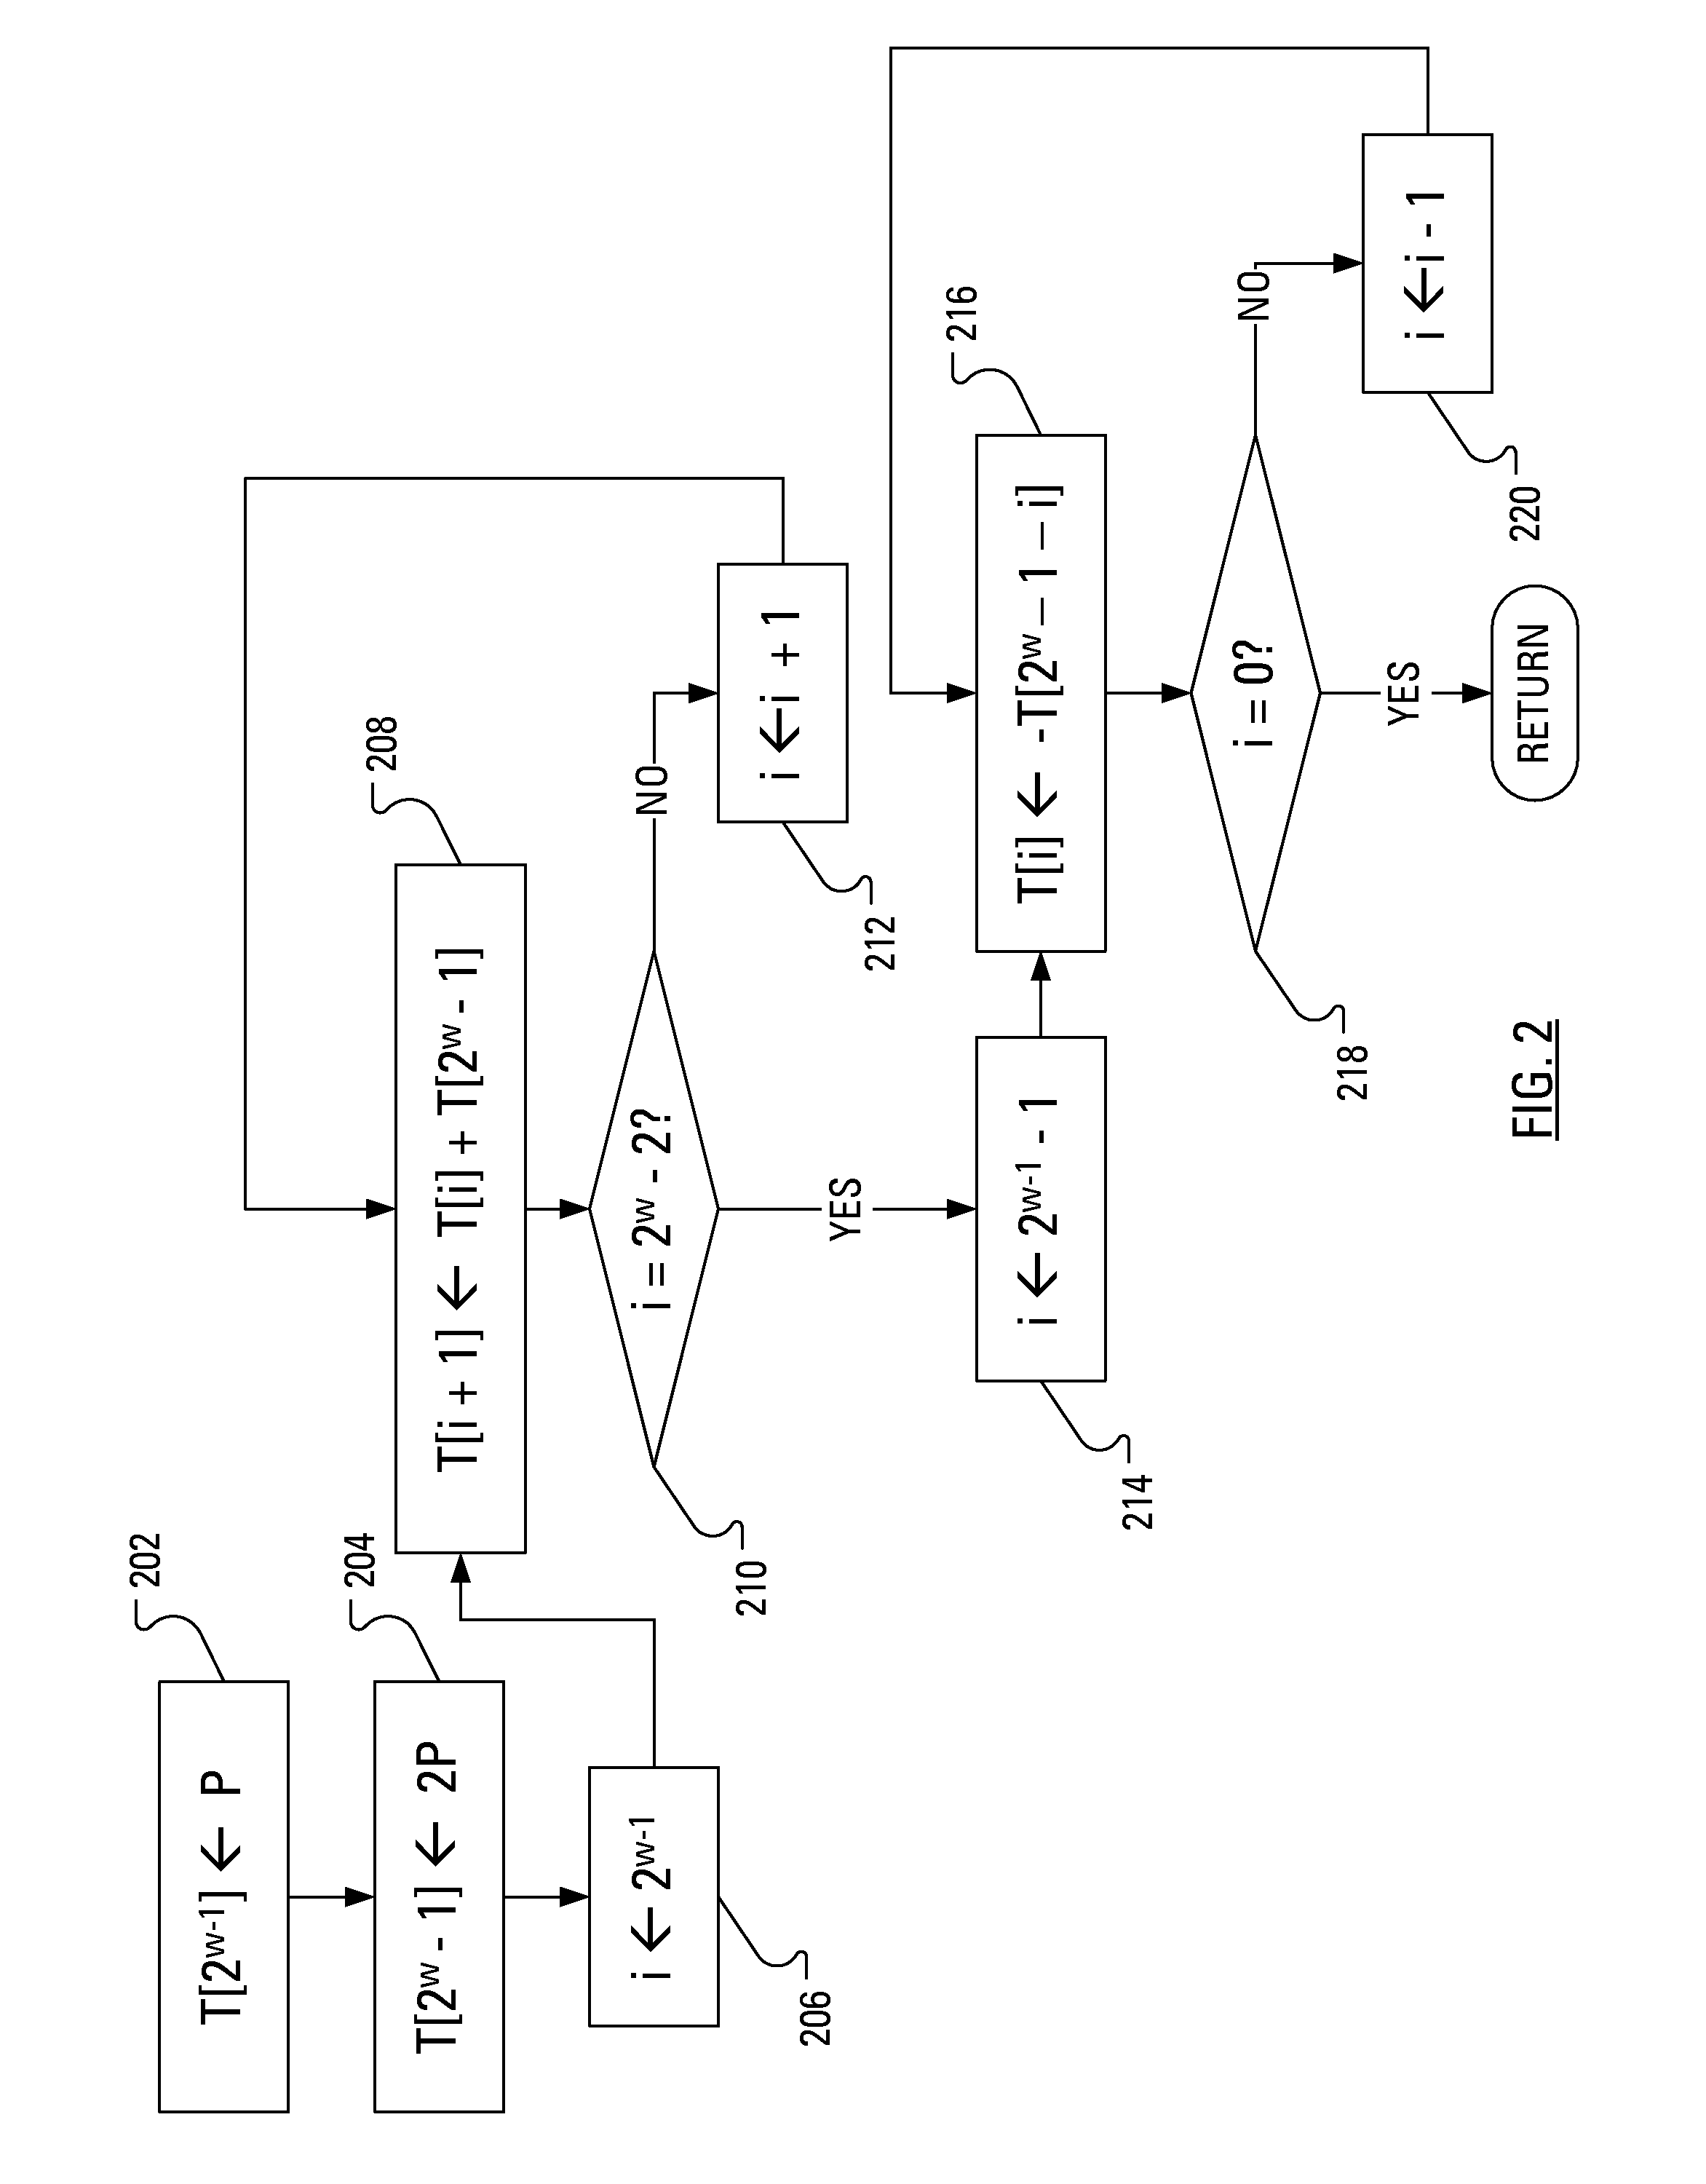 Method and Apparatus for Generating a Public Key in a Manner That Counters Power Analysis Attacks